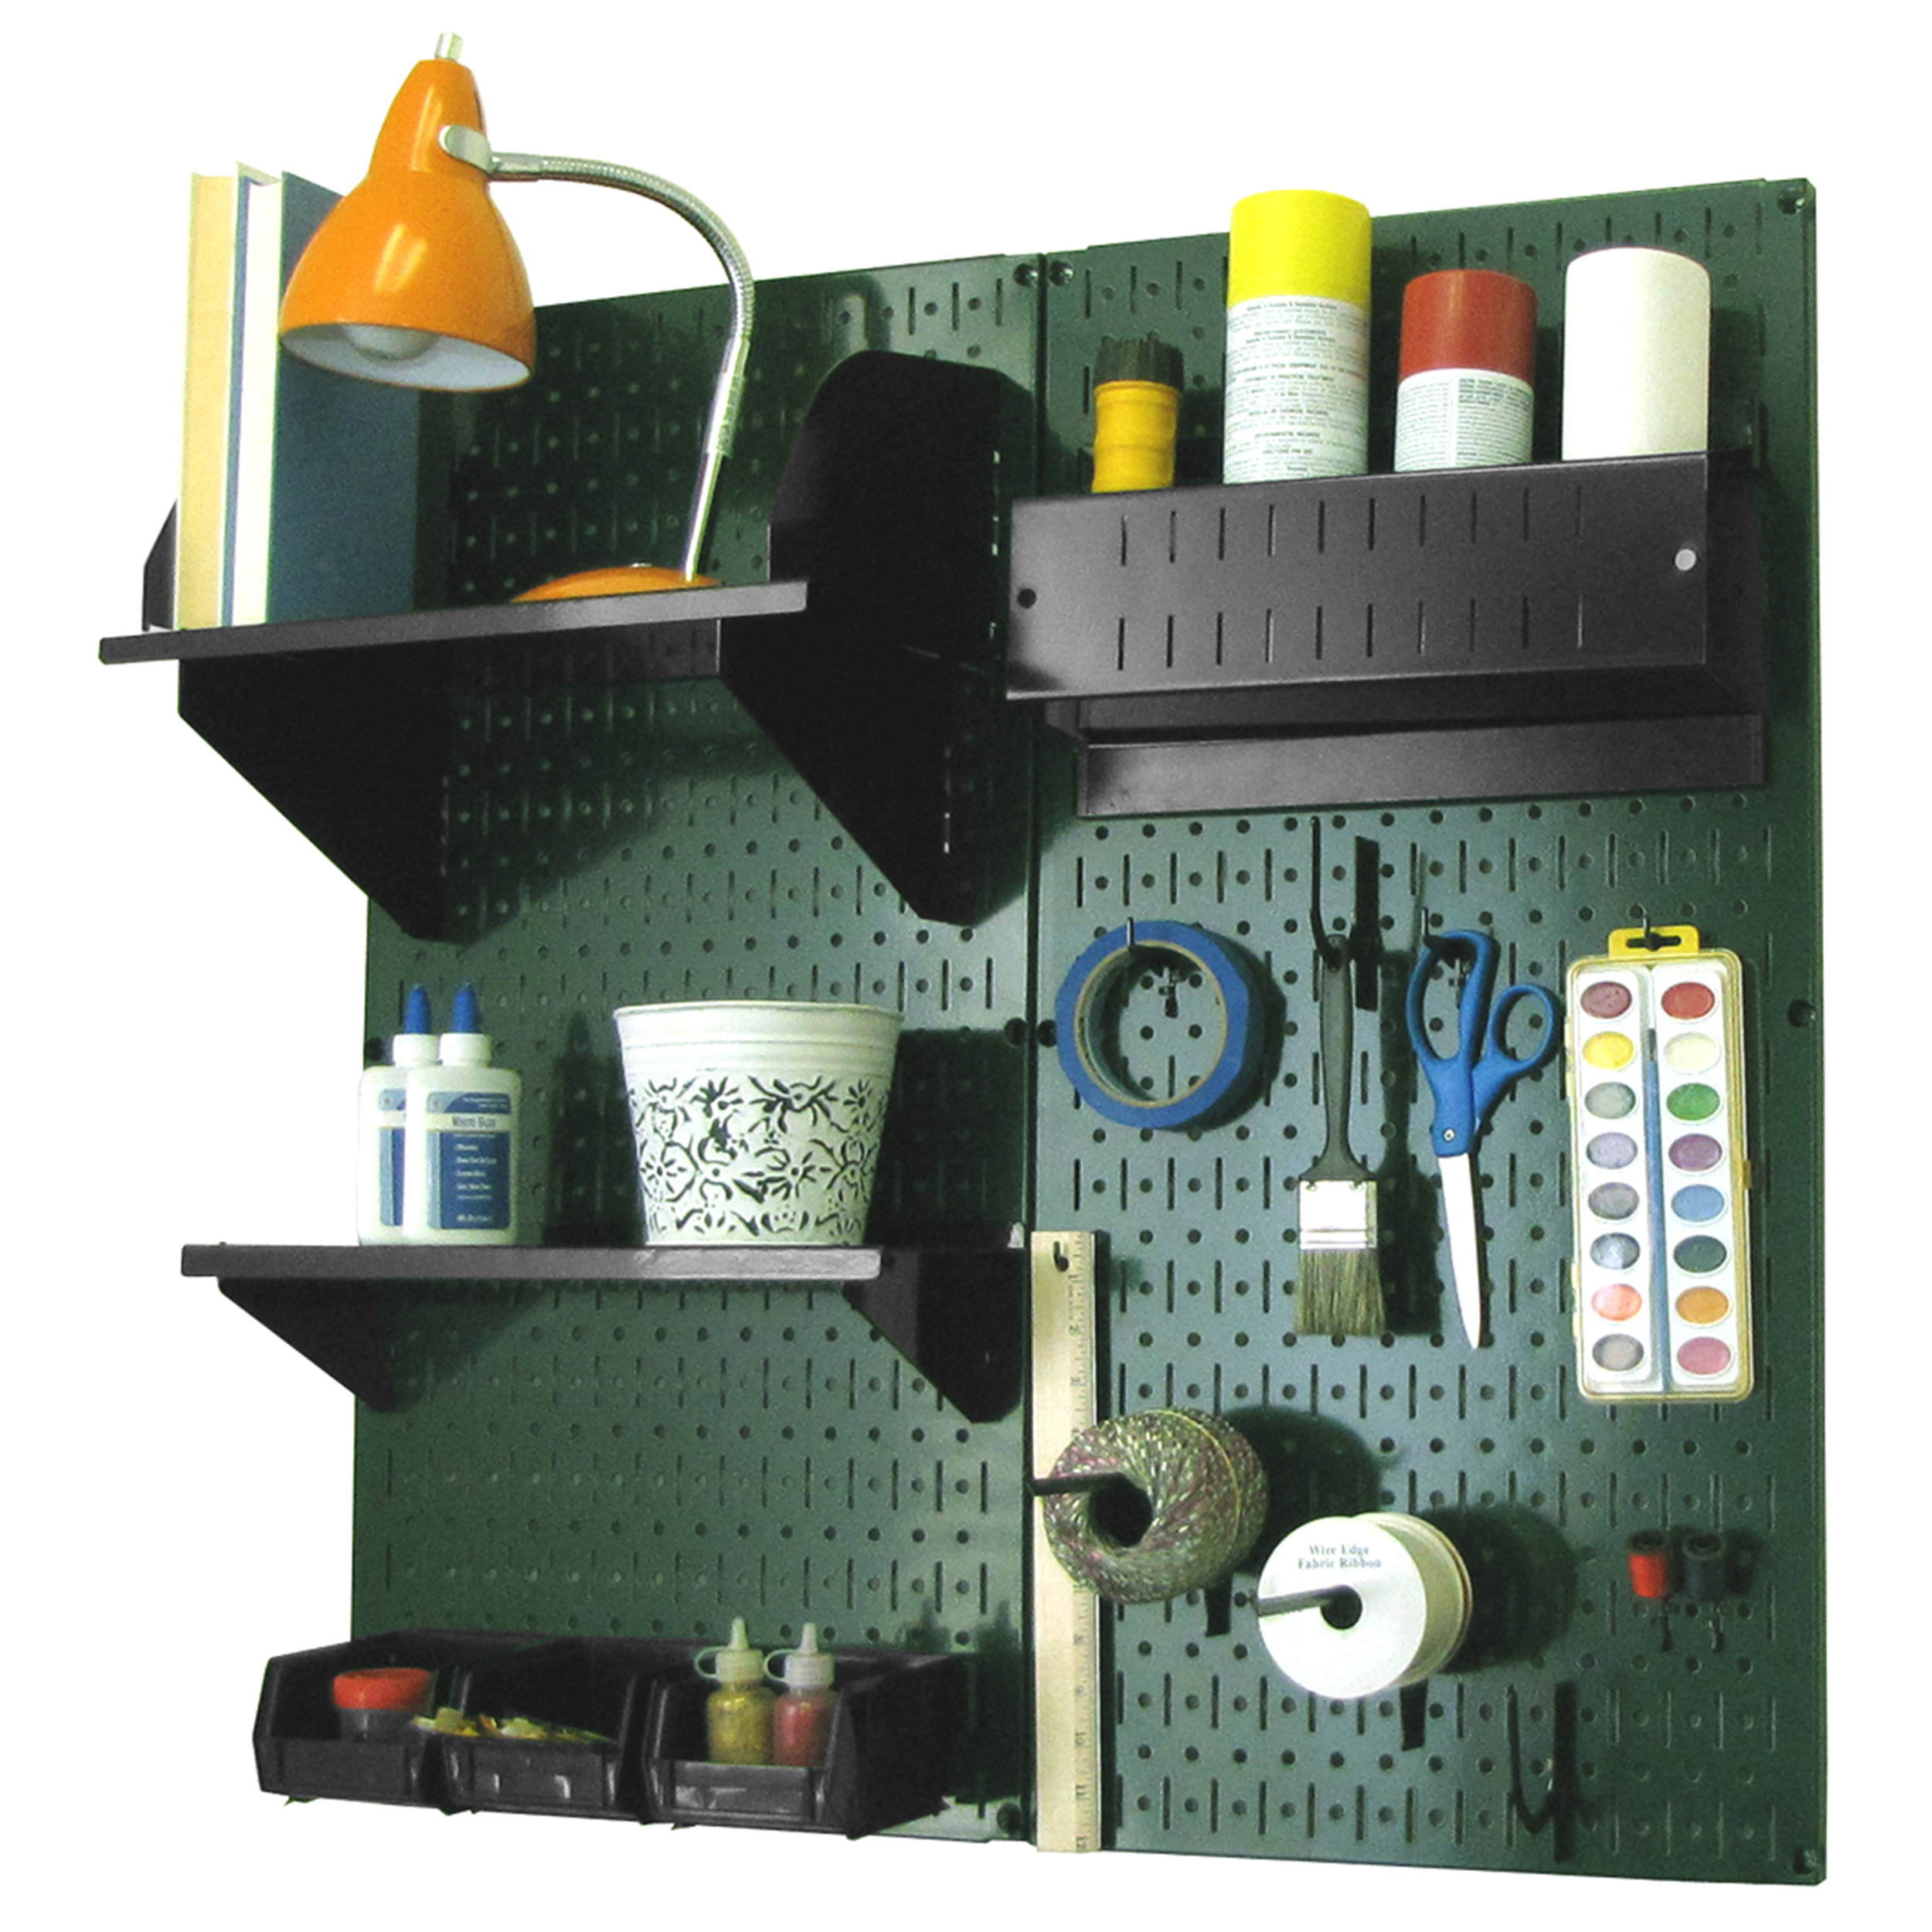 Pegboard Hobby Craft Pegboard Organizer Storage Kit With Green Pegboard And Black Accessories